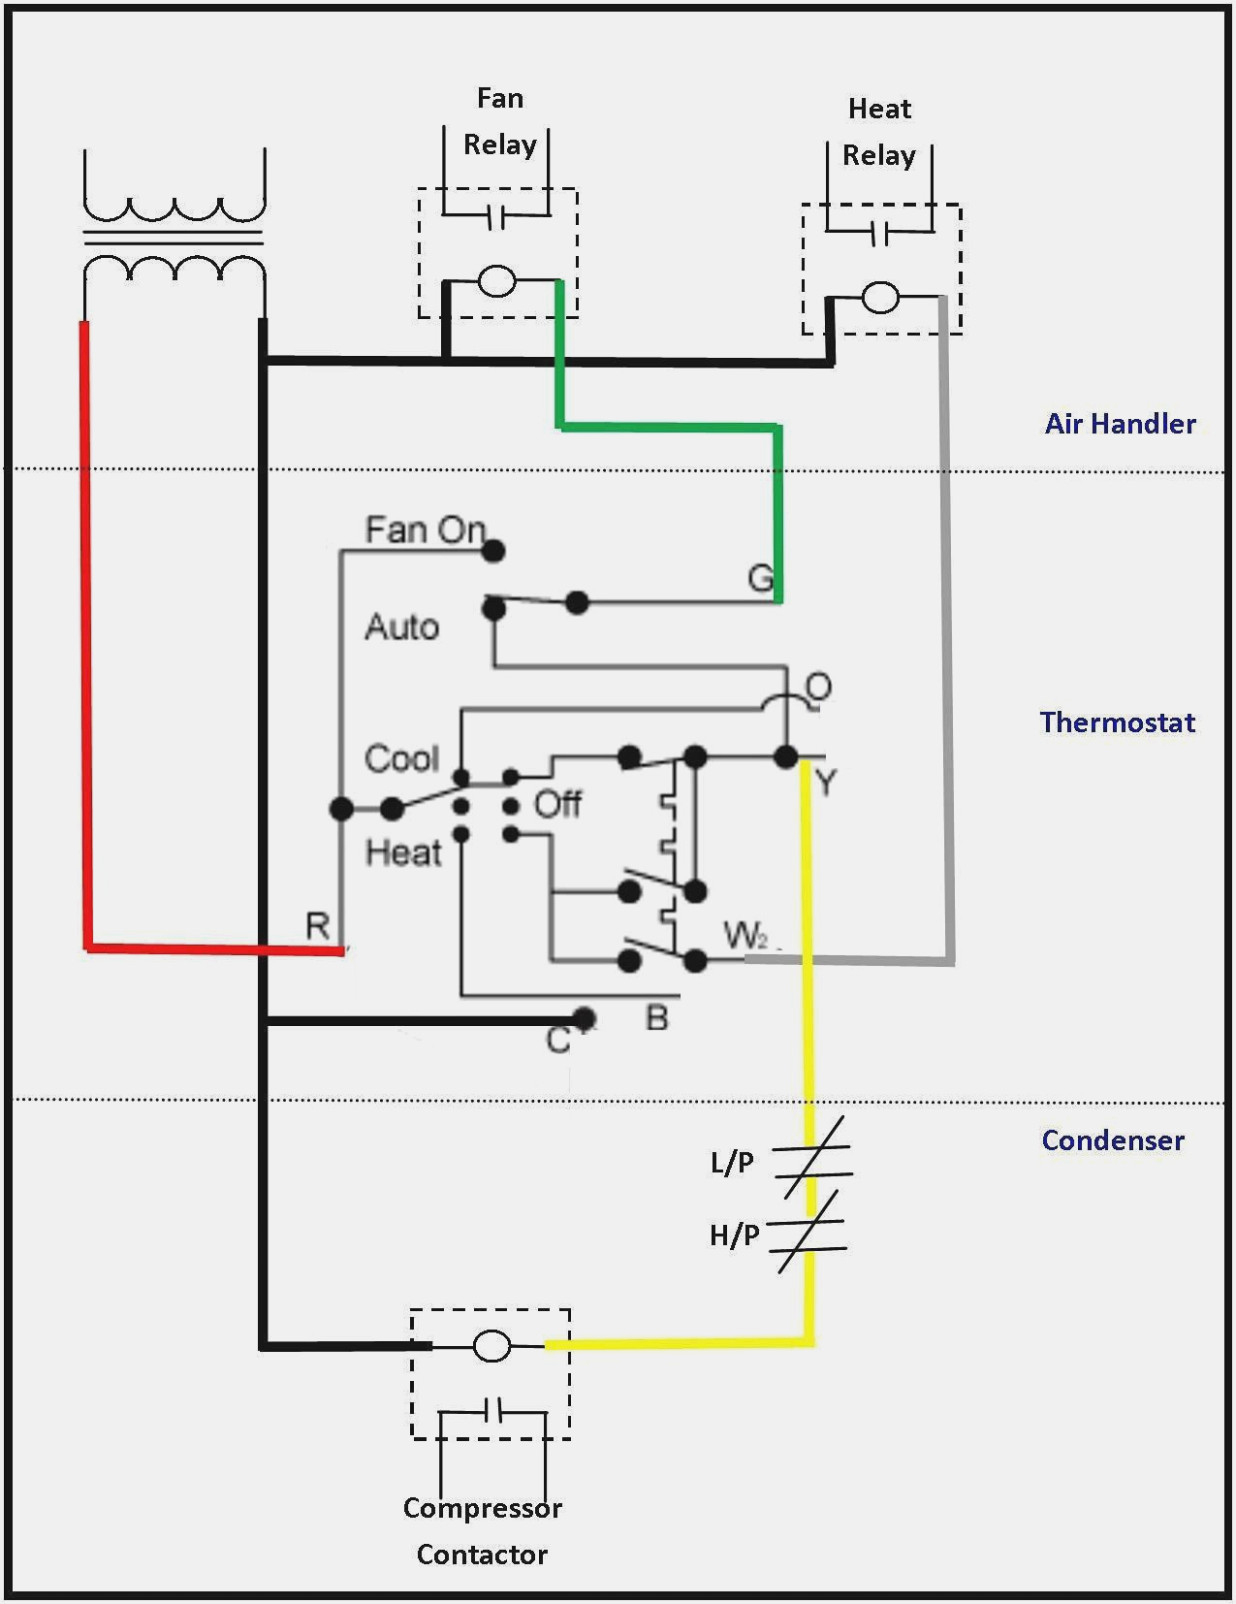 Oil Fired Furnace Wiring Diagram | Wiring Diagram - Oil Furnace Wiring Diagram